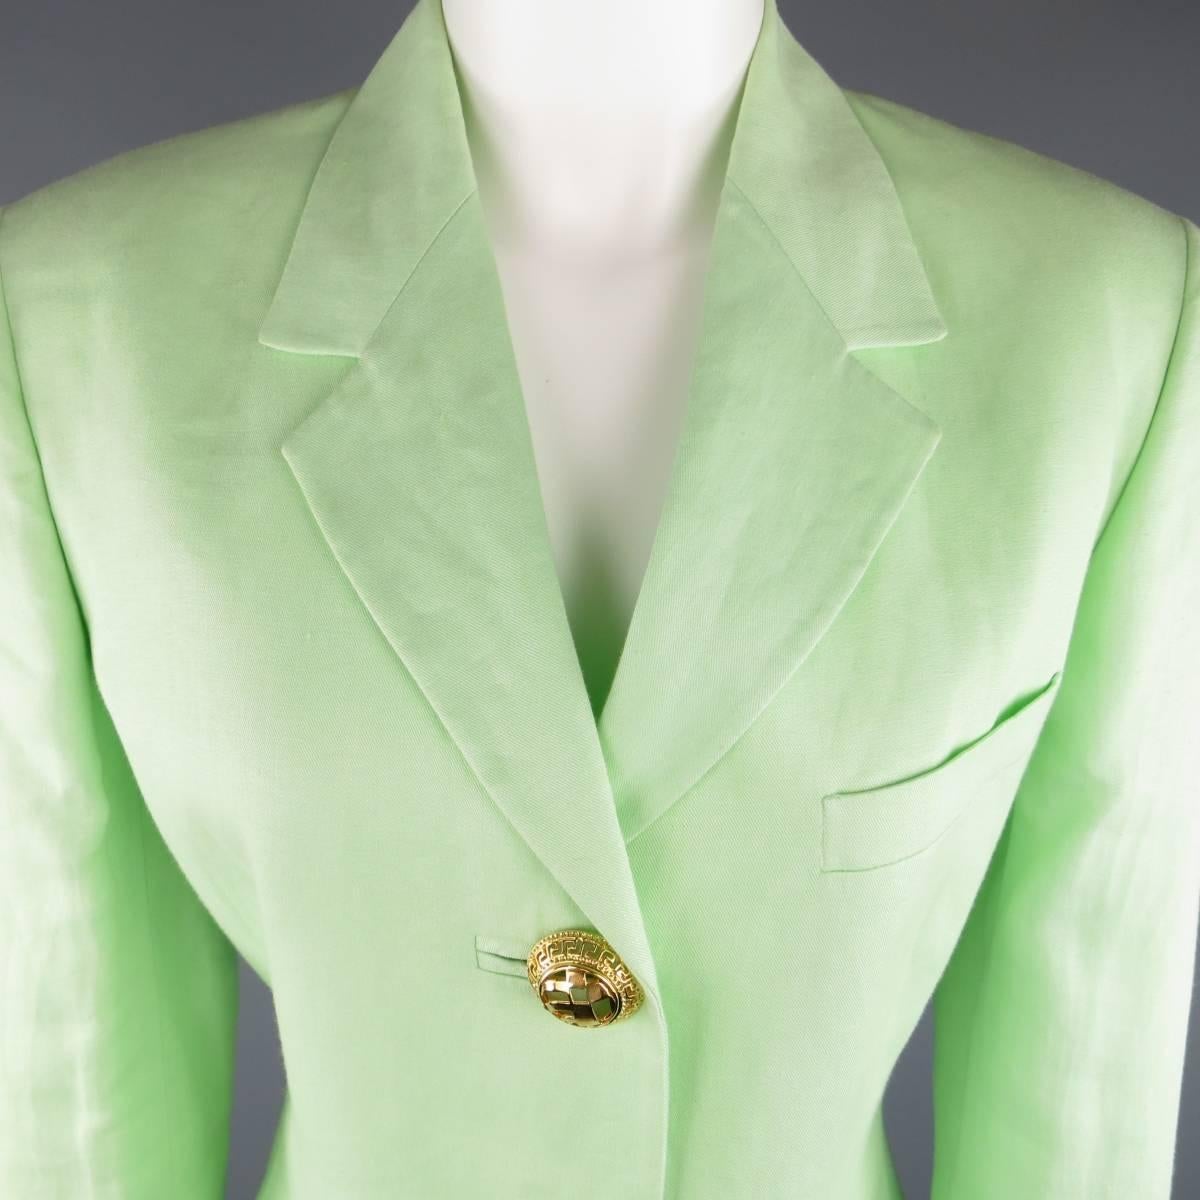 This fabulous vintage 1990's GIANNI VERSACE COUTURE blazer comes in a light weight mint green fabric and features a notch lapel and oversized gold tone Greek pattern cutout statement button closure. Care tag removed. Includes extra button. Made in